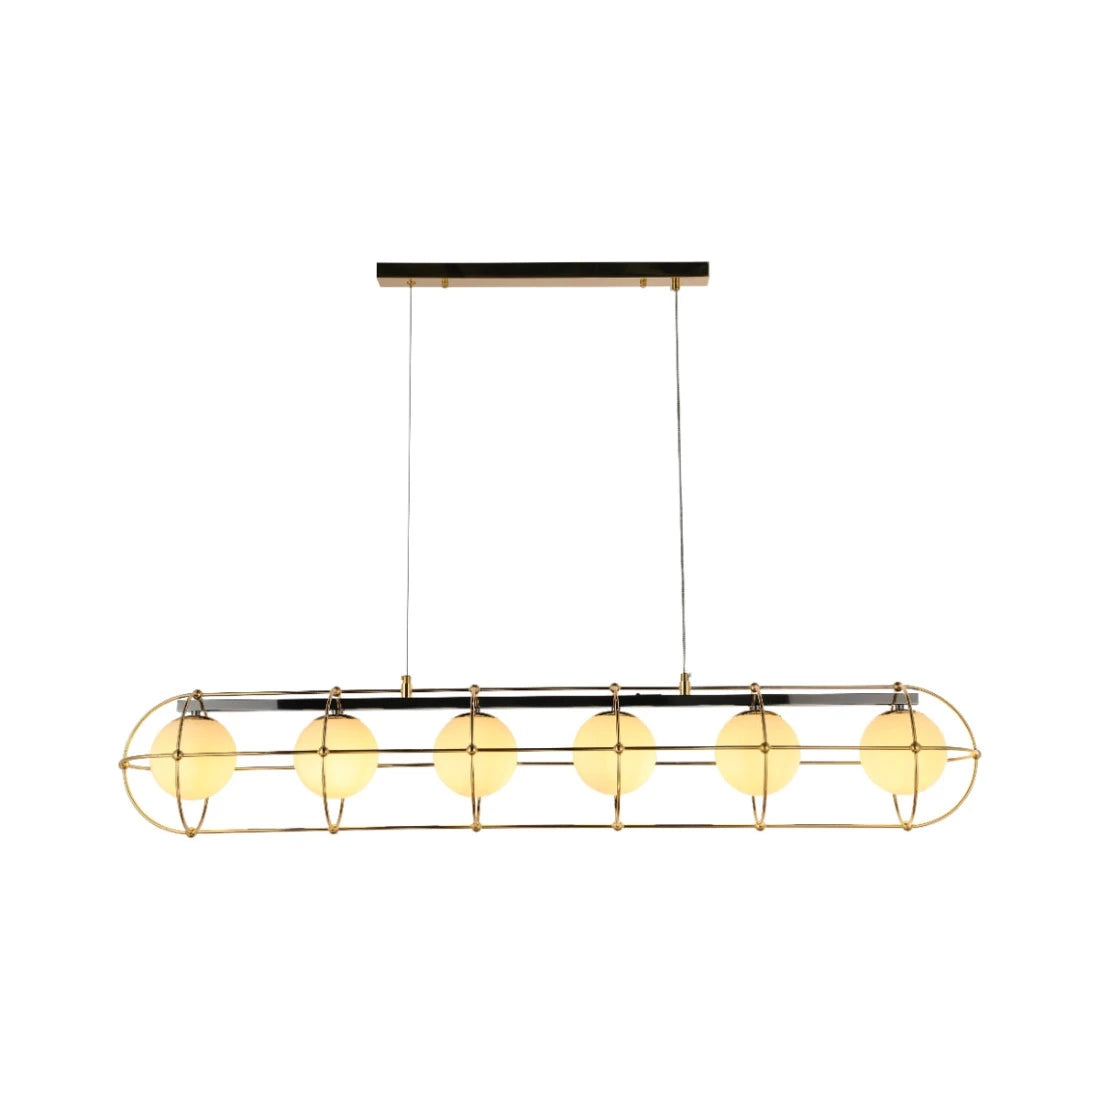 Main image of Vintage-Modern Orb Chandelier with Geometric Gold Detailing G9 150-19036